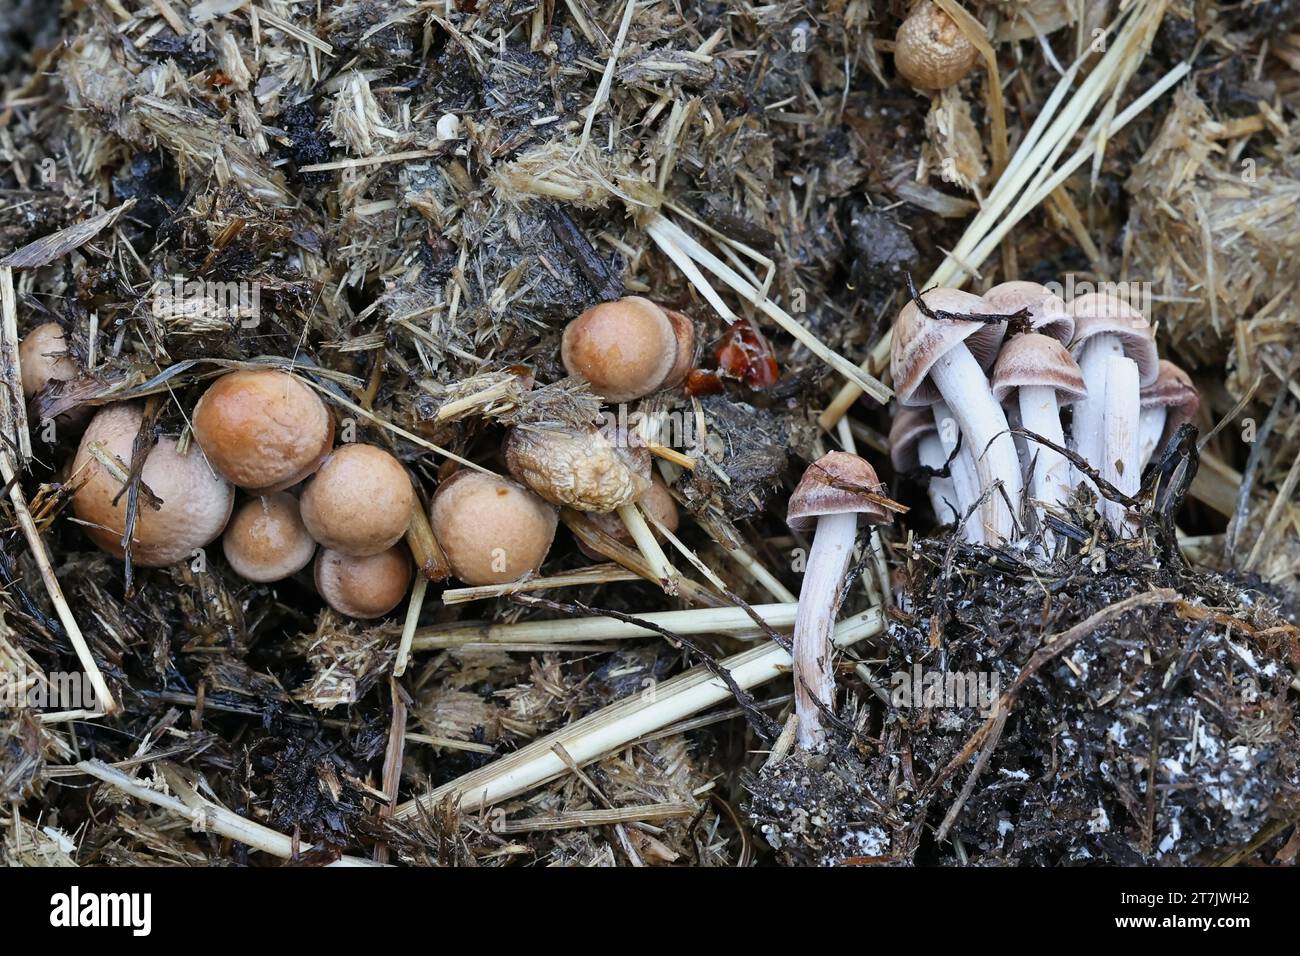 Panaeolus cinctulus, commonly known as the banded mottlegill, weed Panaeolus or subbs, psilocybin mushroom growing on horse dung in Finland Stock Photo